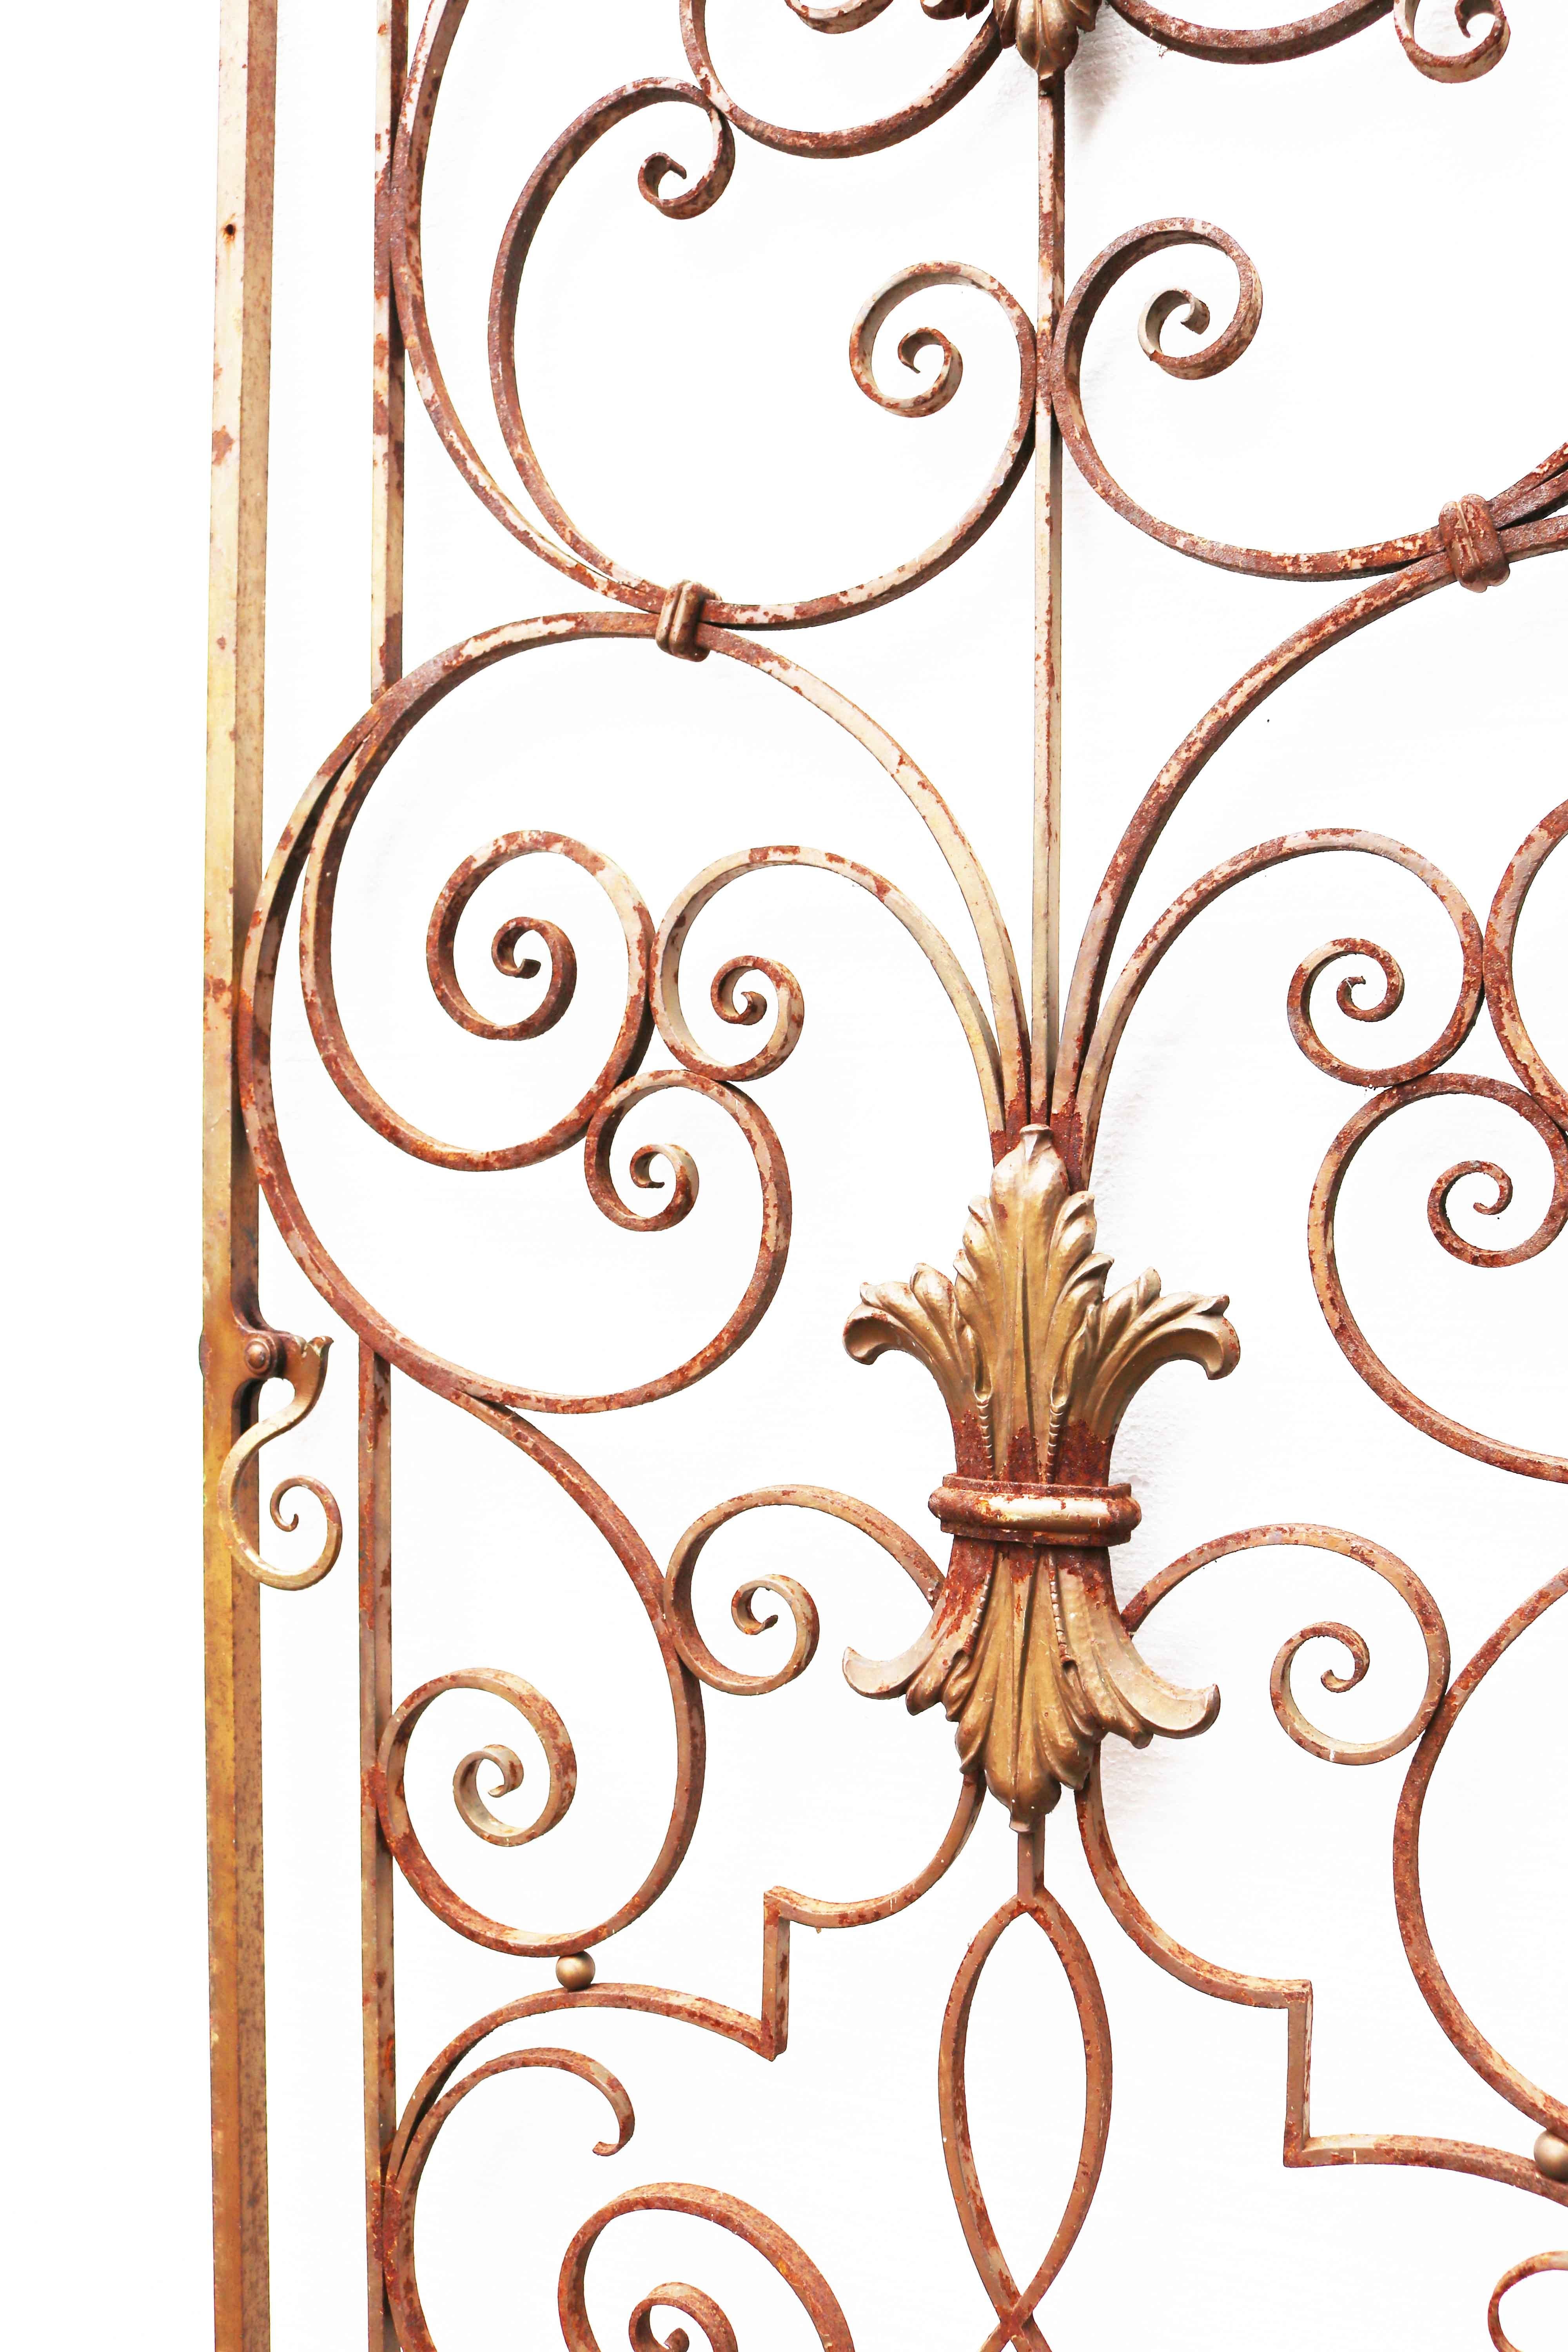 Wrought Iron Antique Gate In Fair Condition For Sale In Wormelow, Herefordshire